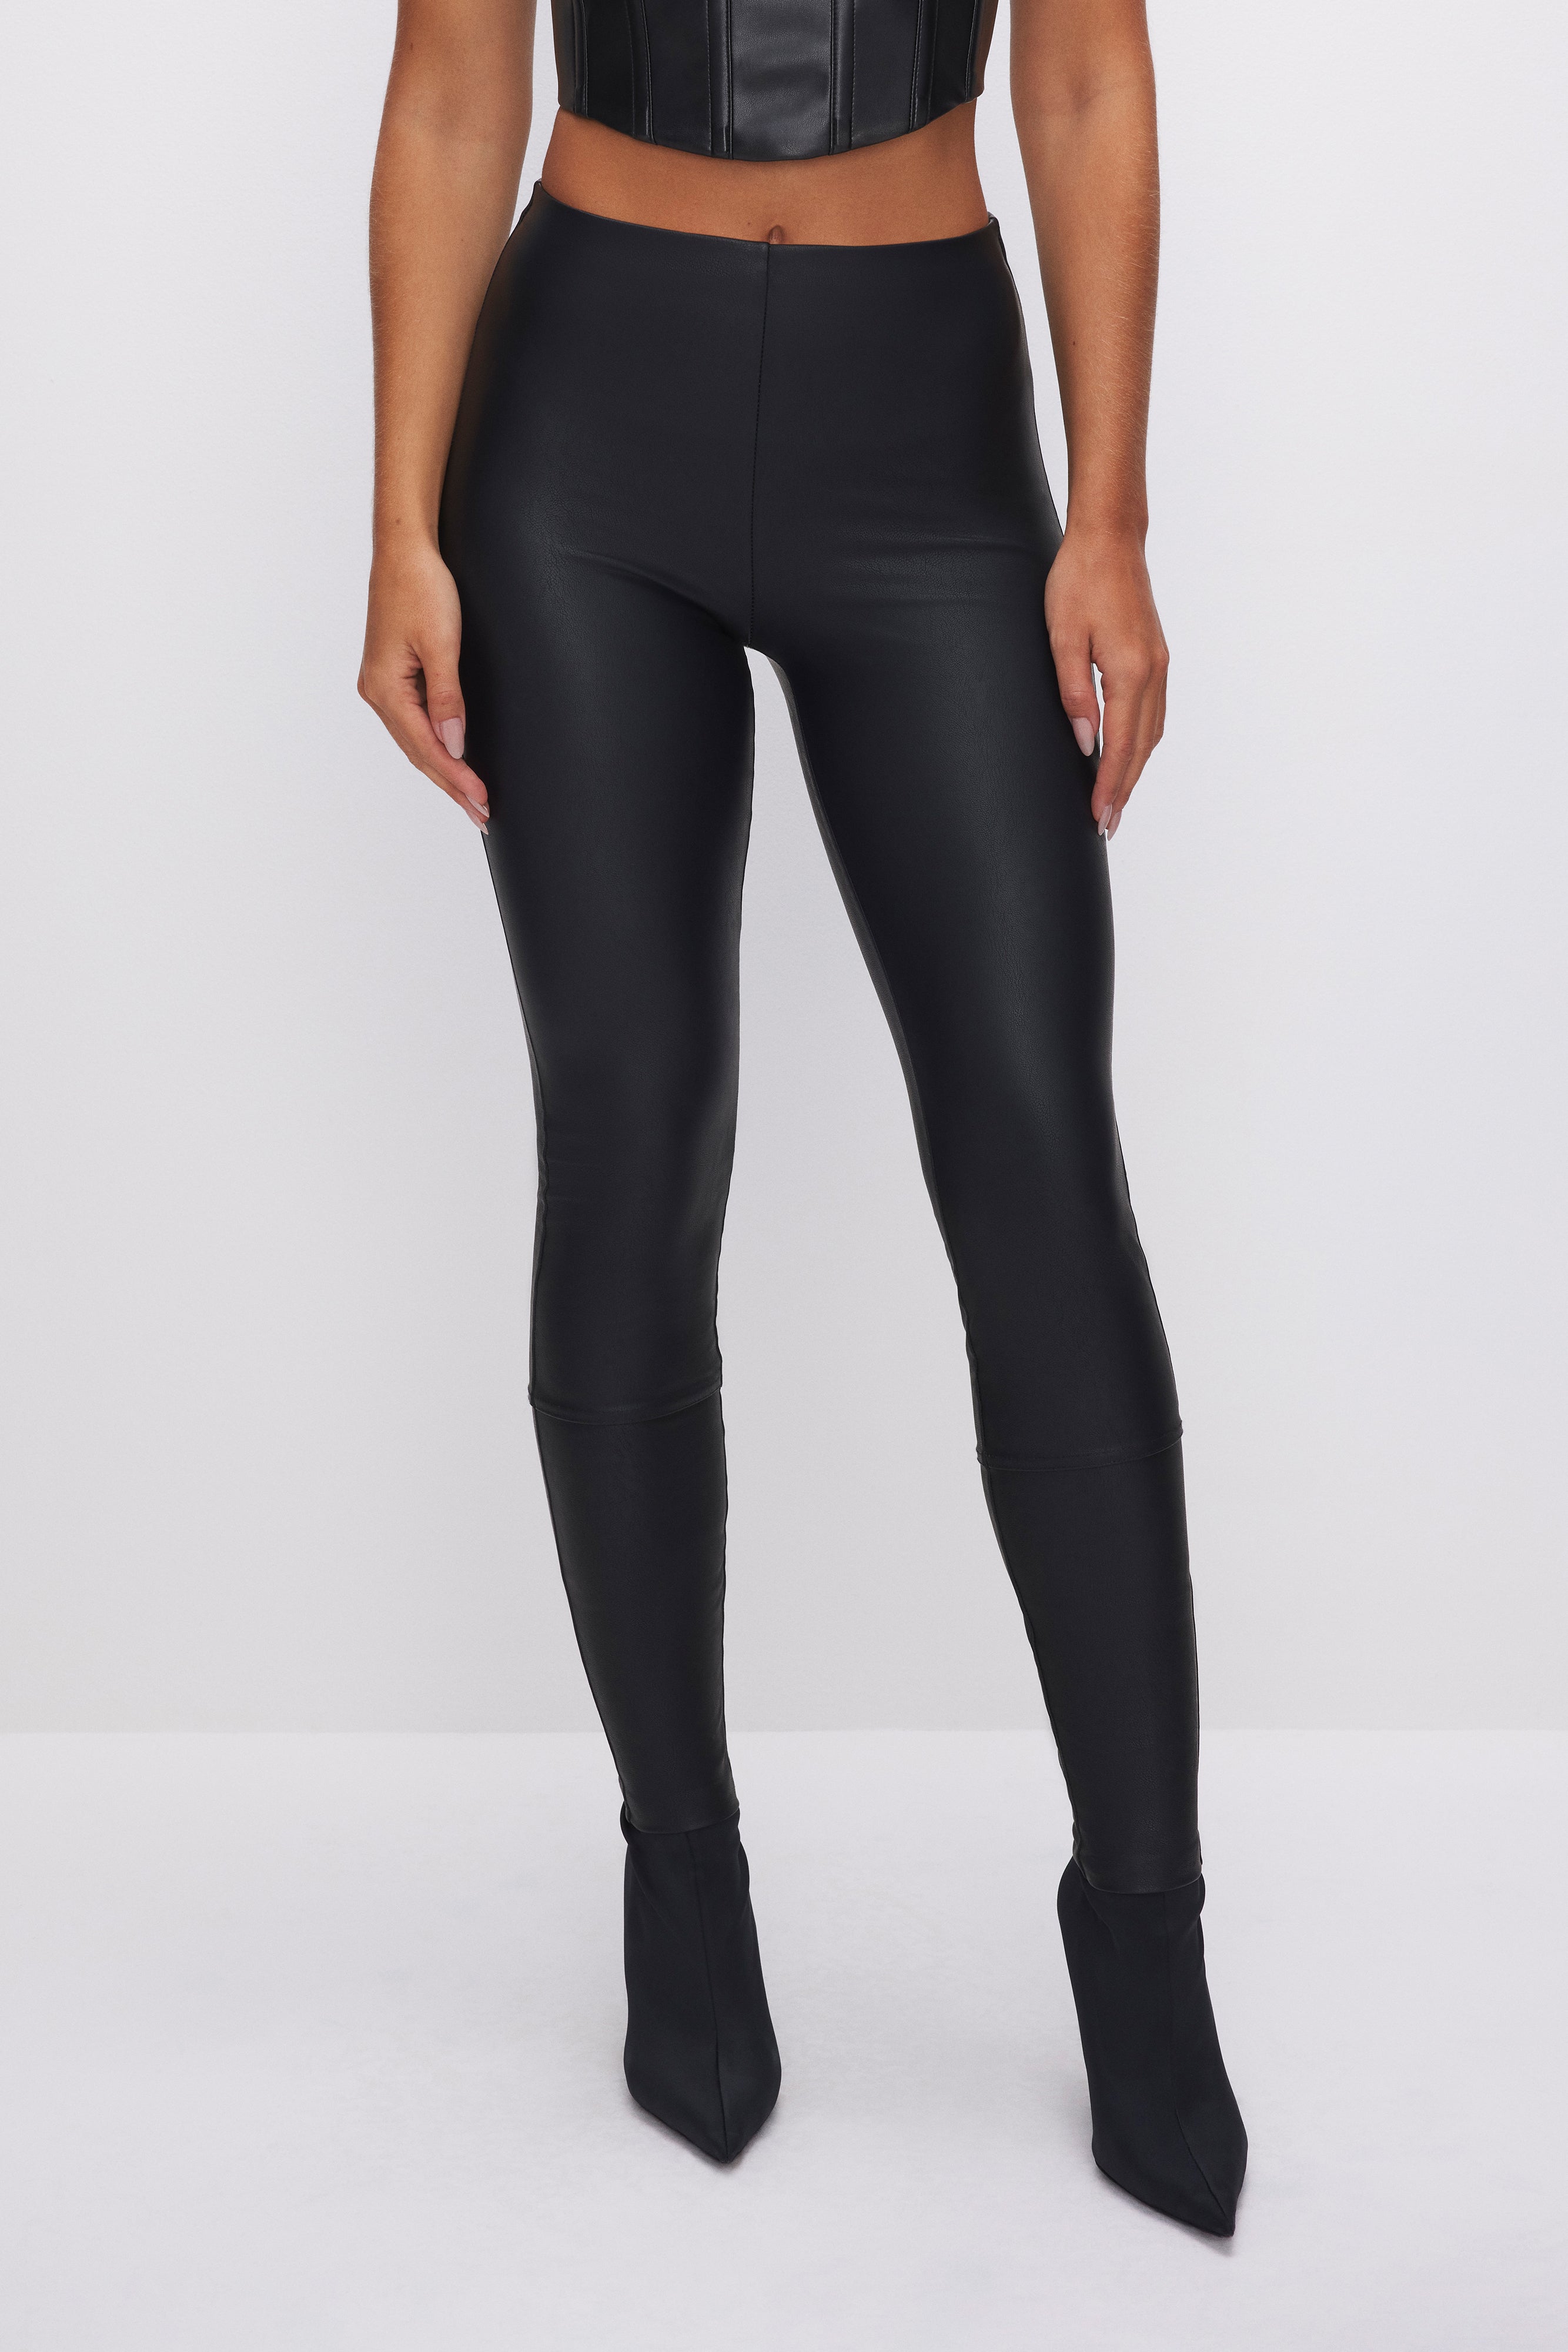 I found the perfect leather leggings from New Look - they're great